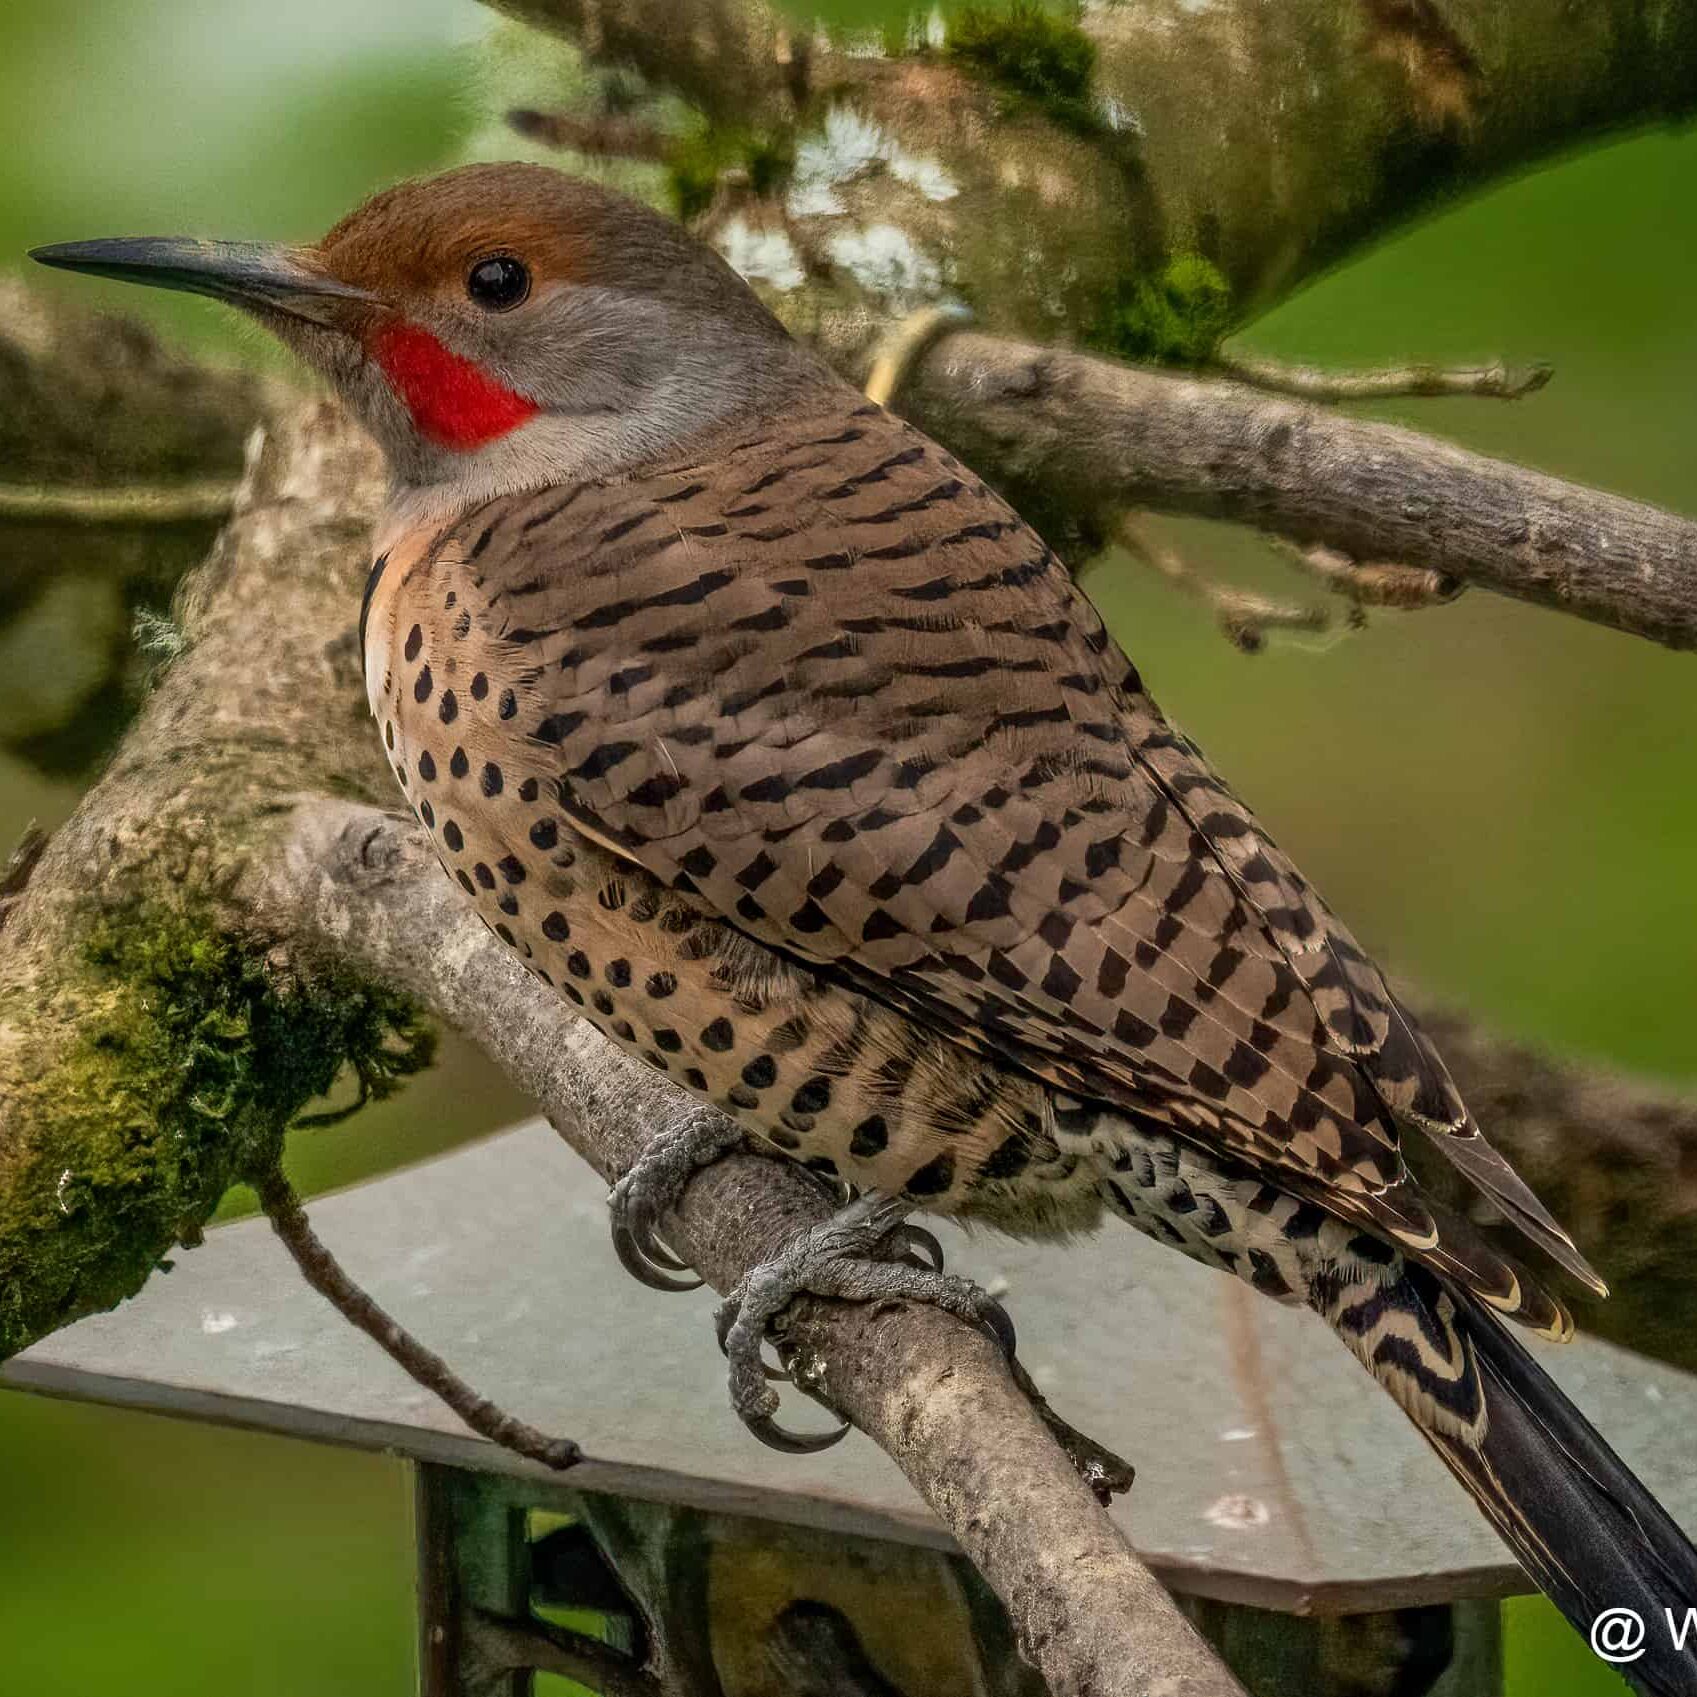 A male Northern Flicker perched near suet feeder in the background.  Photo by Wes Jensen